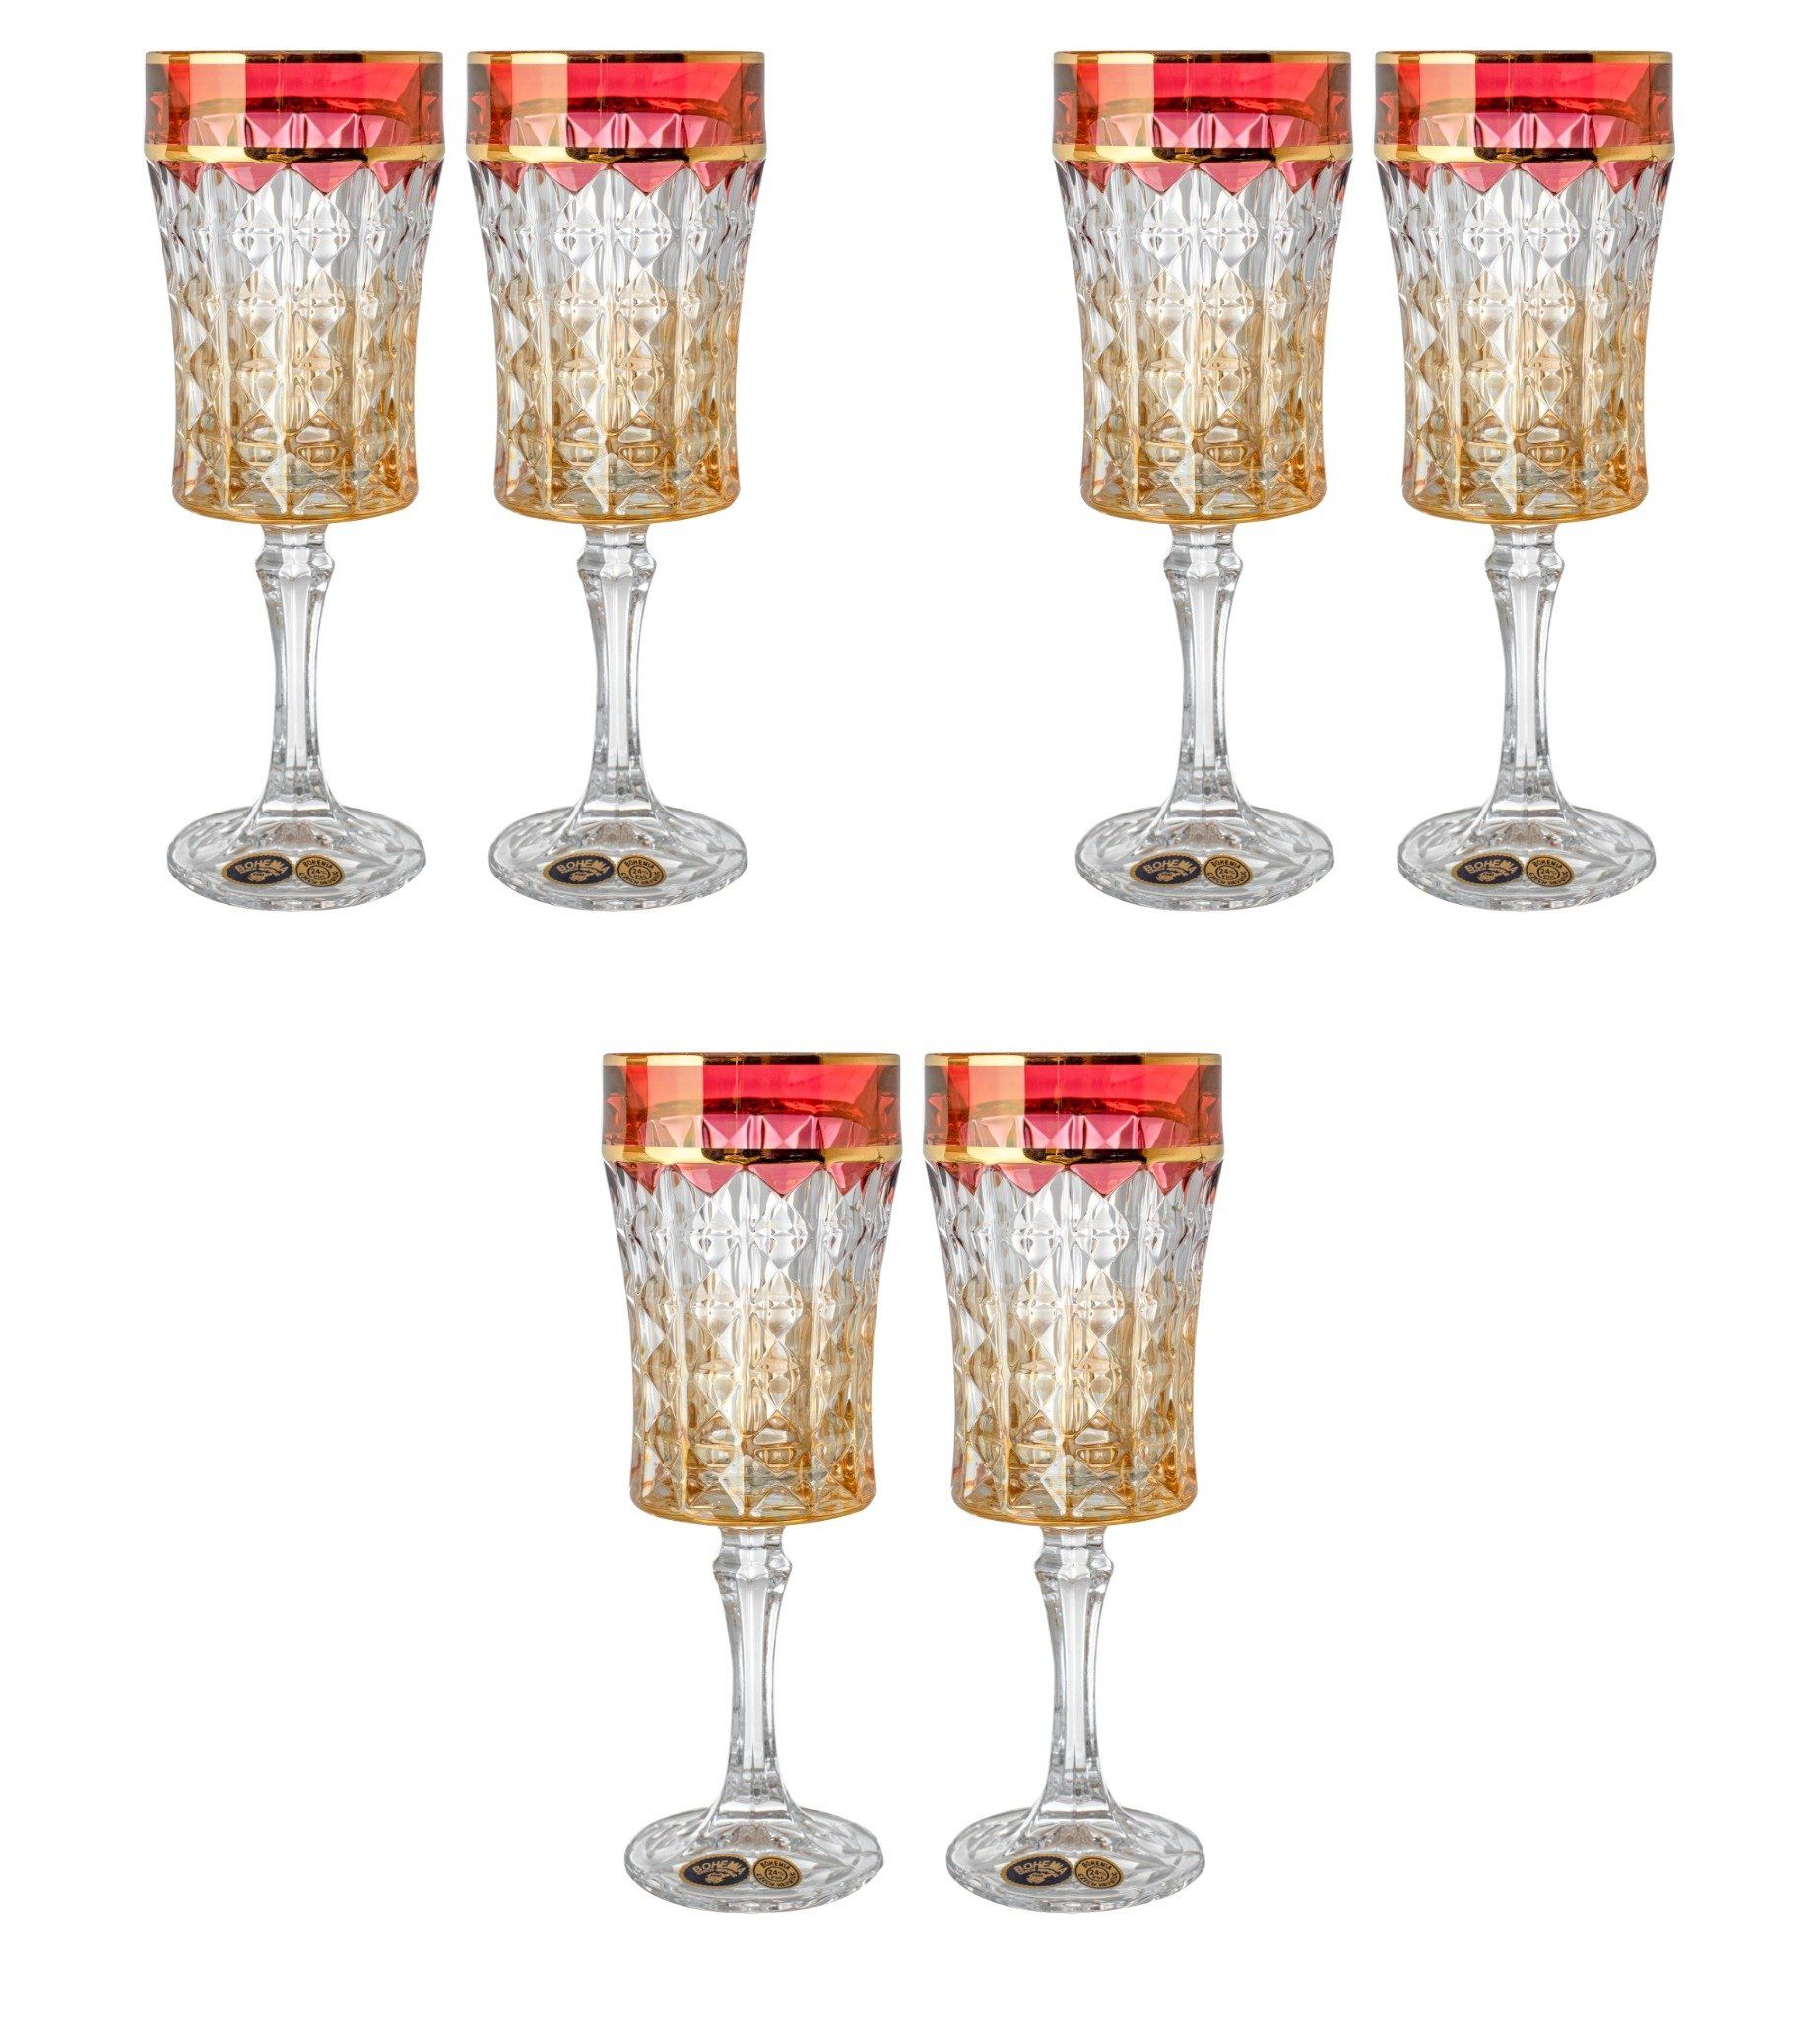 Bohemia Crystal - Goblet Glass Set 6 Pieces - Gold & Red - 200ml - 2700010507